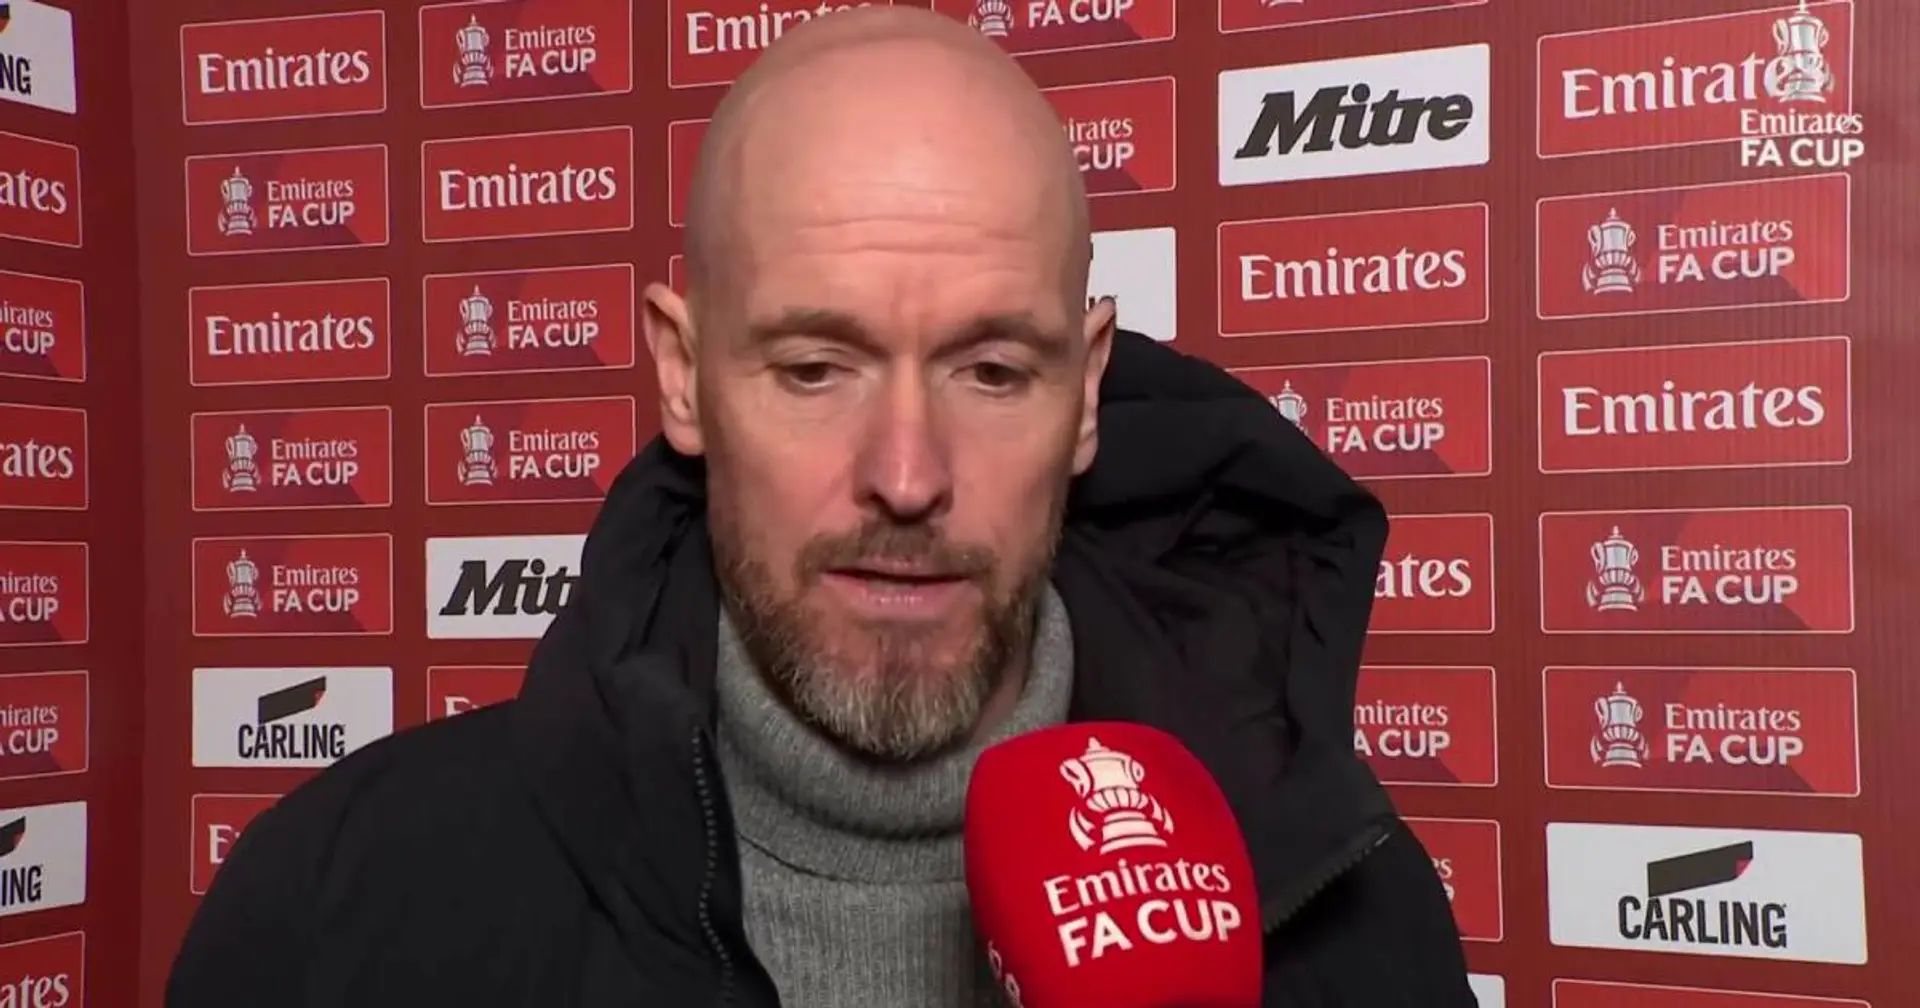 'Newport are 16th in League Two': Man United fans livid with Erik ten Hag's post-match comments